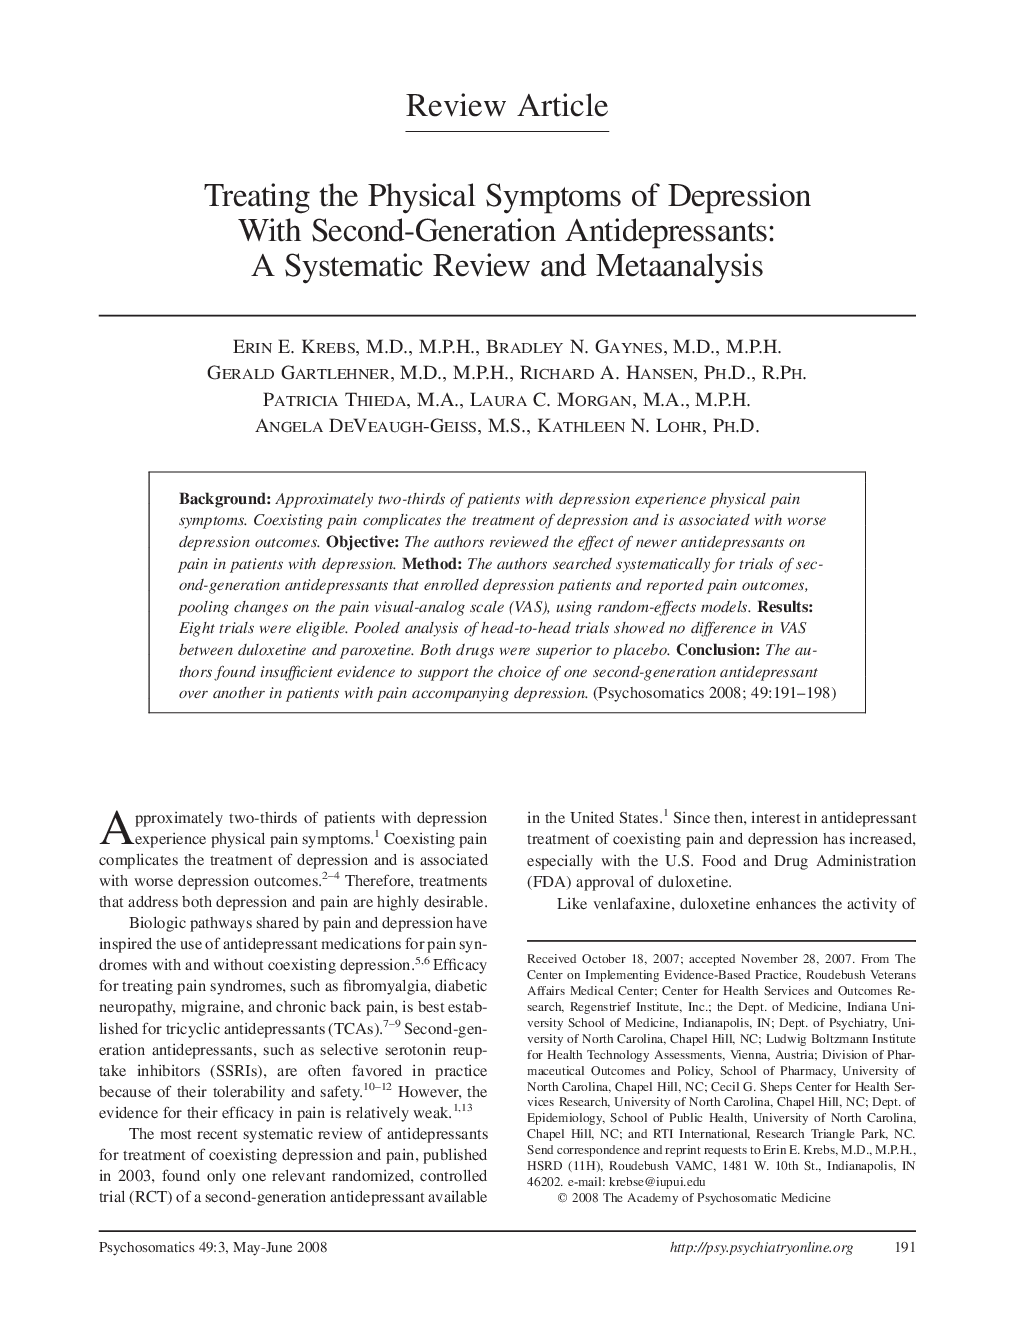 Treating the Physical Symptoms of Depression With Second-Generation Antidepressants: A Systematic Review and Metaanalysis